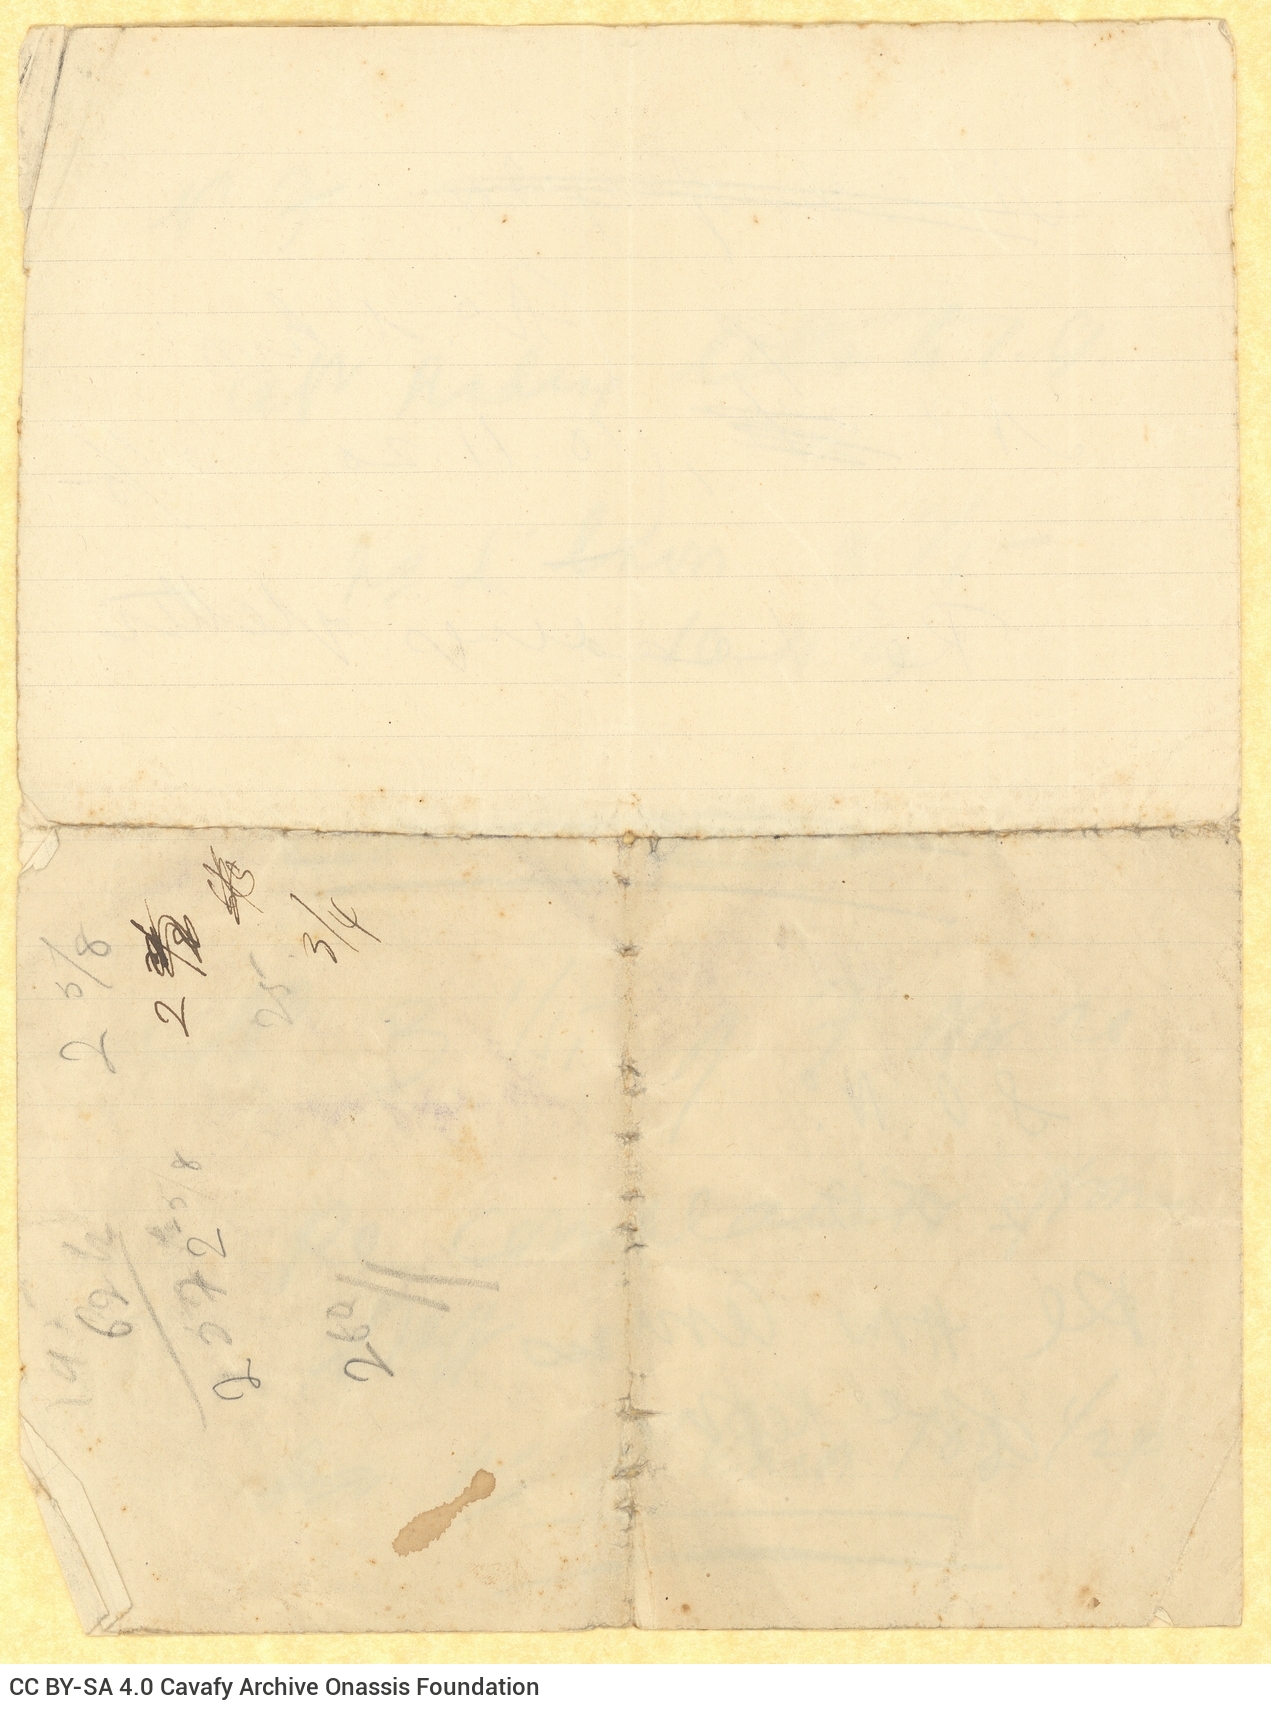 Handwritten notes (possibly of official nature) on a ruled double sheet notepaper. They refer to the years 1917, 1920, 192